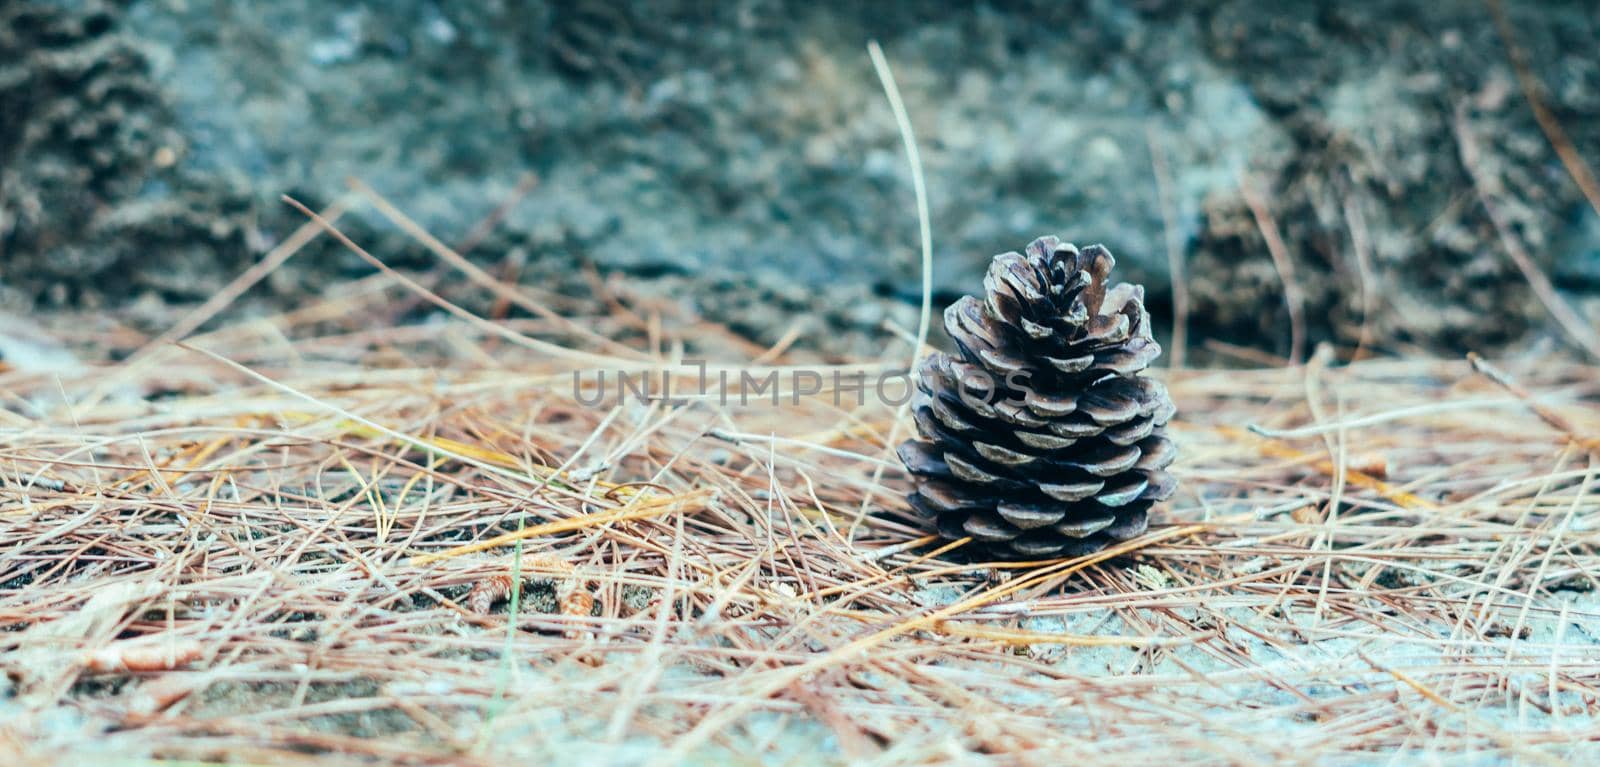 BANNER Abstract background. Real nature photo. Close up one alone coniferous pine cone, forest day, dry needles lie on ground. Pale beige blue brown color sunlit haze. Symbol of life, beginning by nandrey85